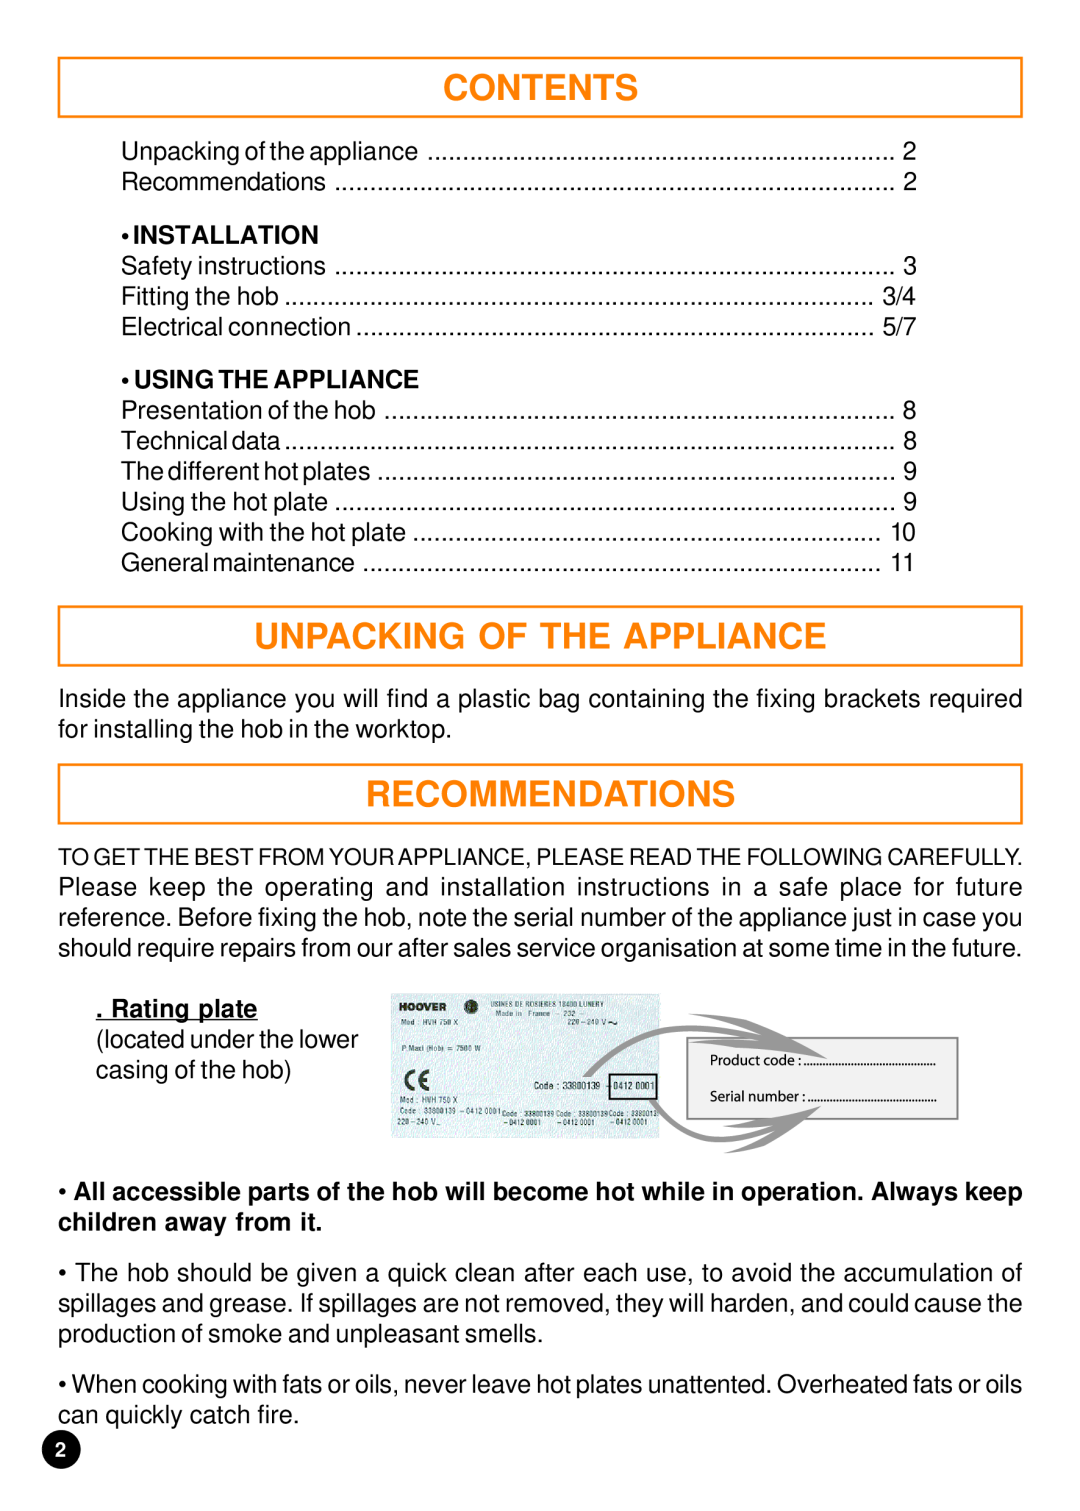 Hoover HEH 604 manual Contents, Unpacking Of The Appliance, Recommendations, Installation, Using The Appliance 